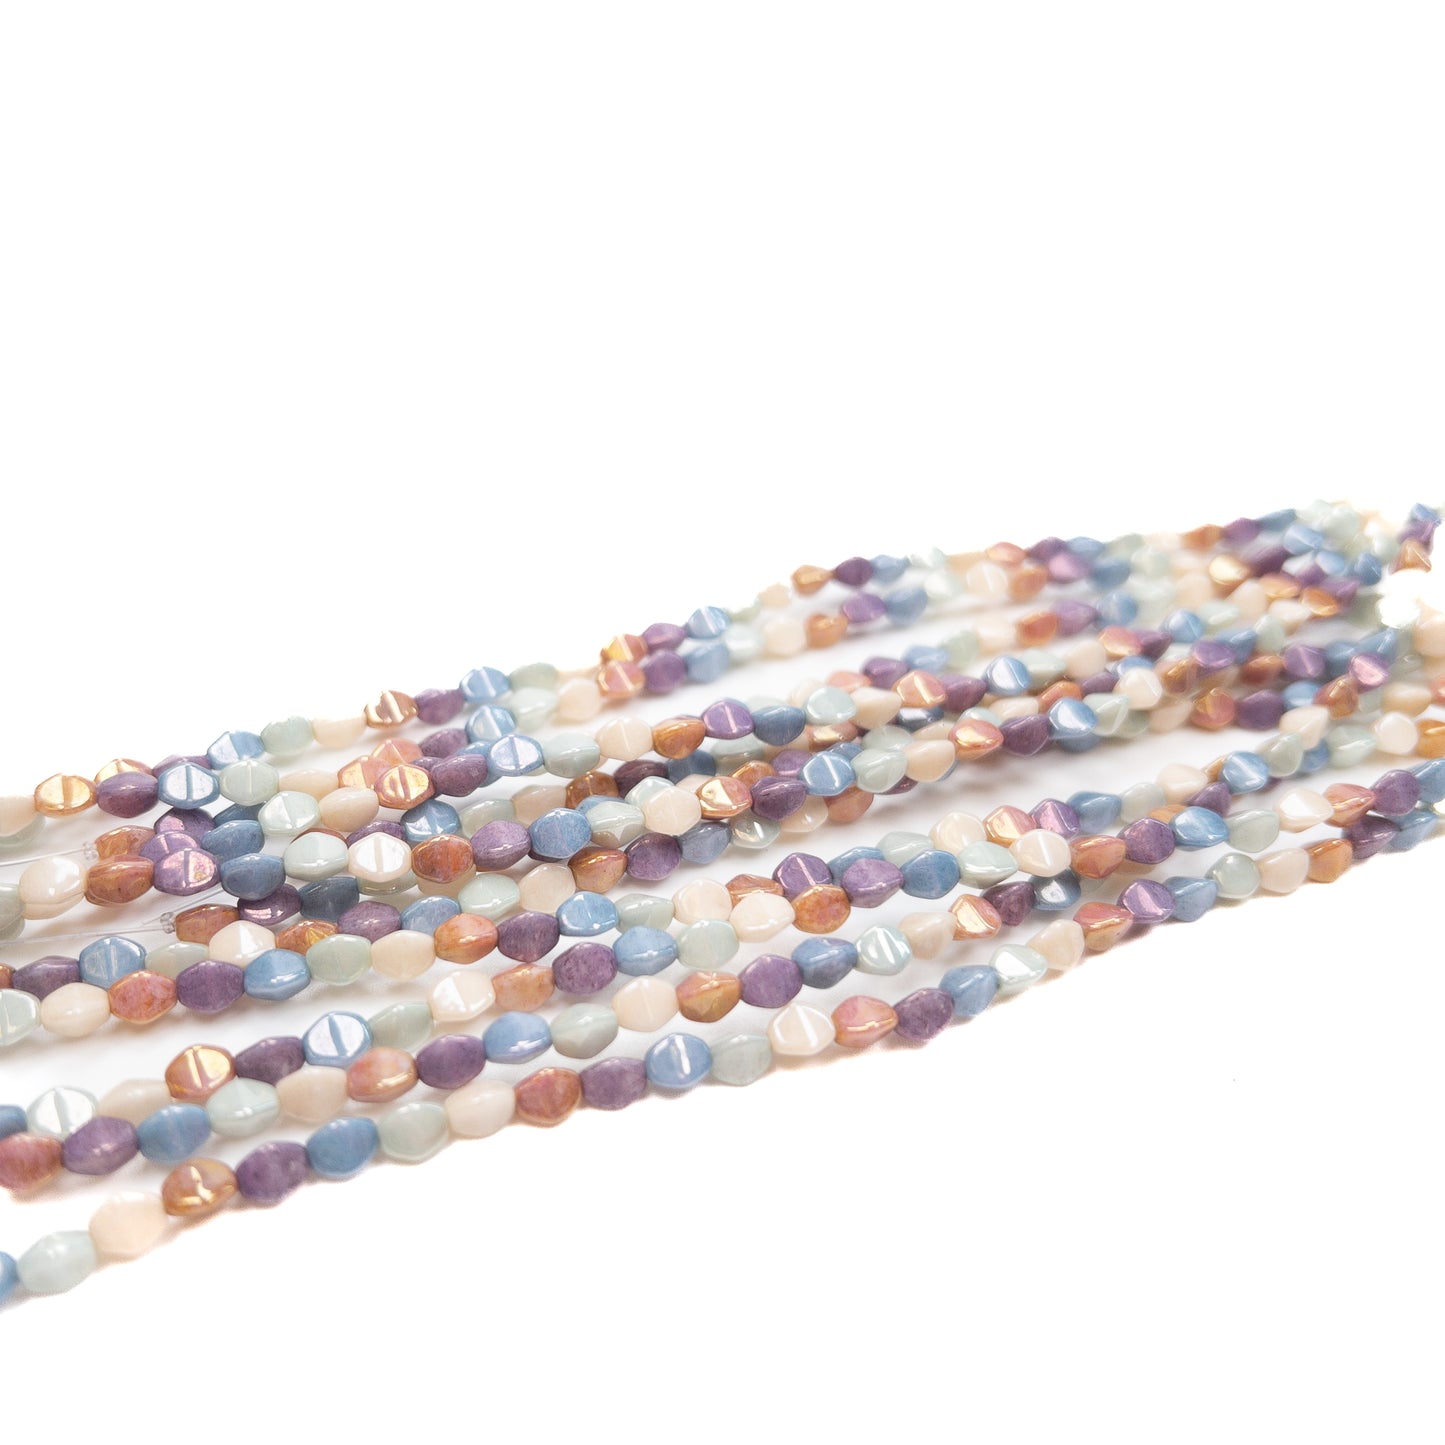 Opaque Luster Rainbow Mix 6mm Pinched Bicone Glass Bead - 35 pcs.